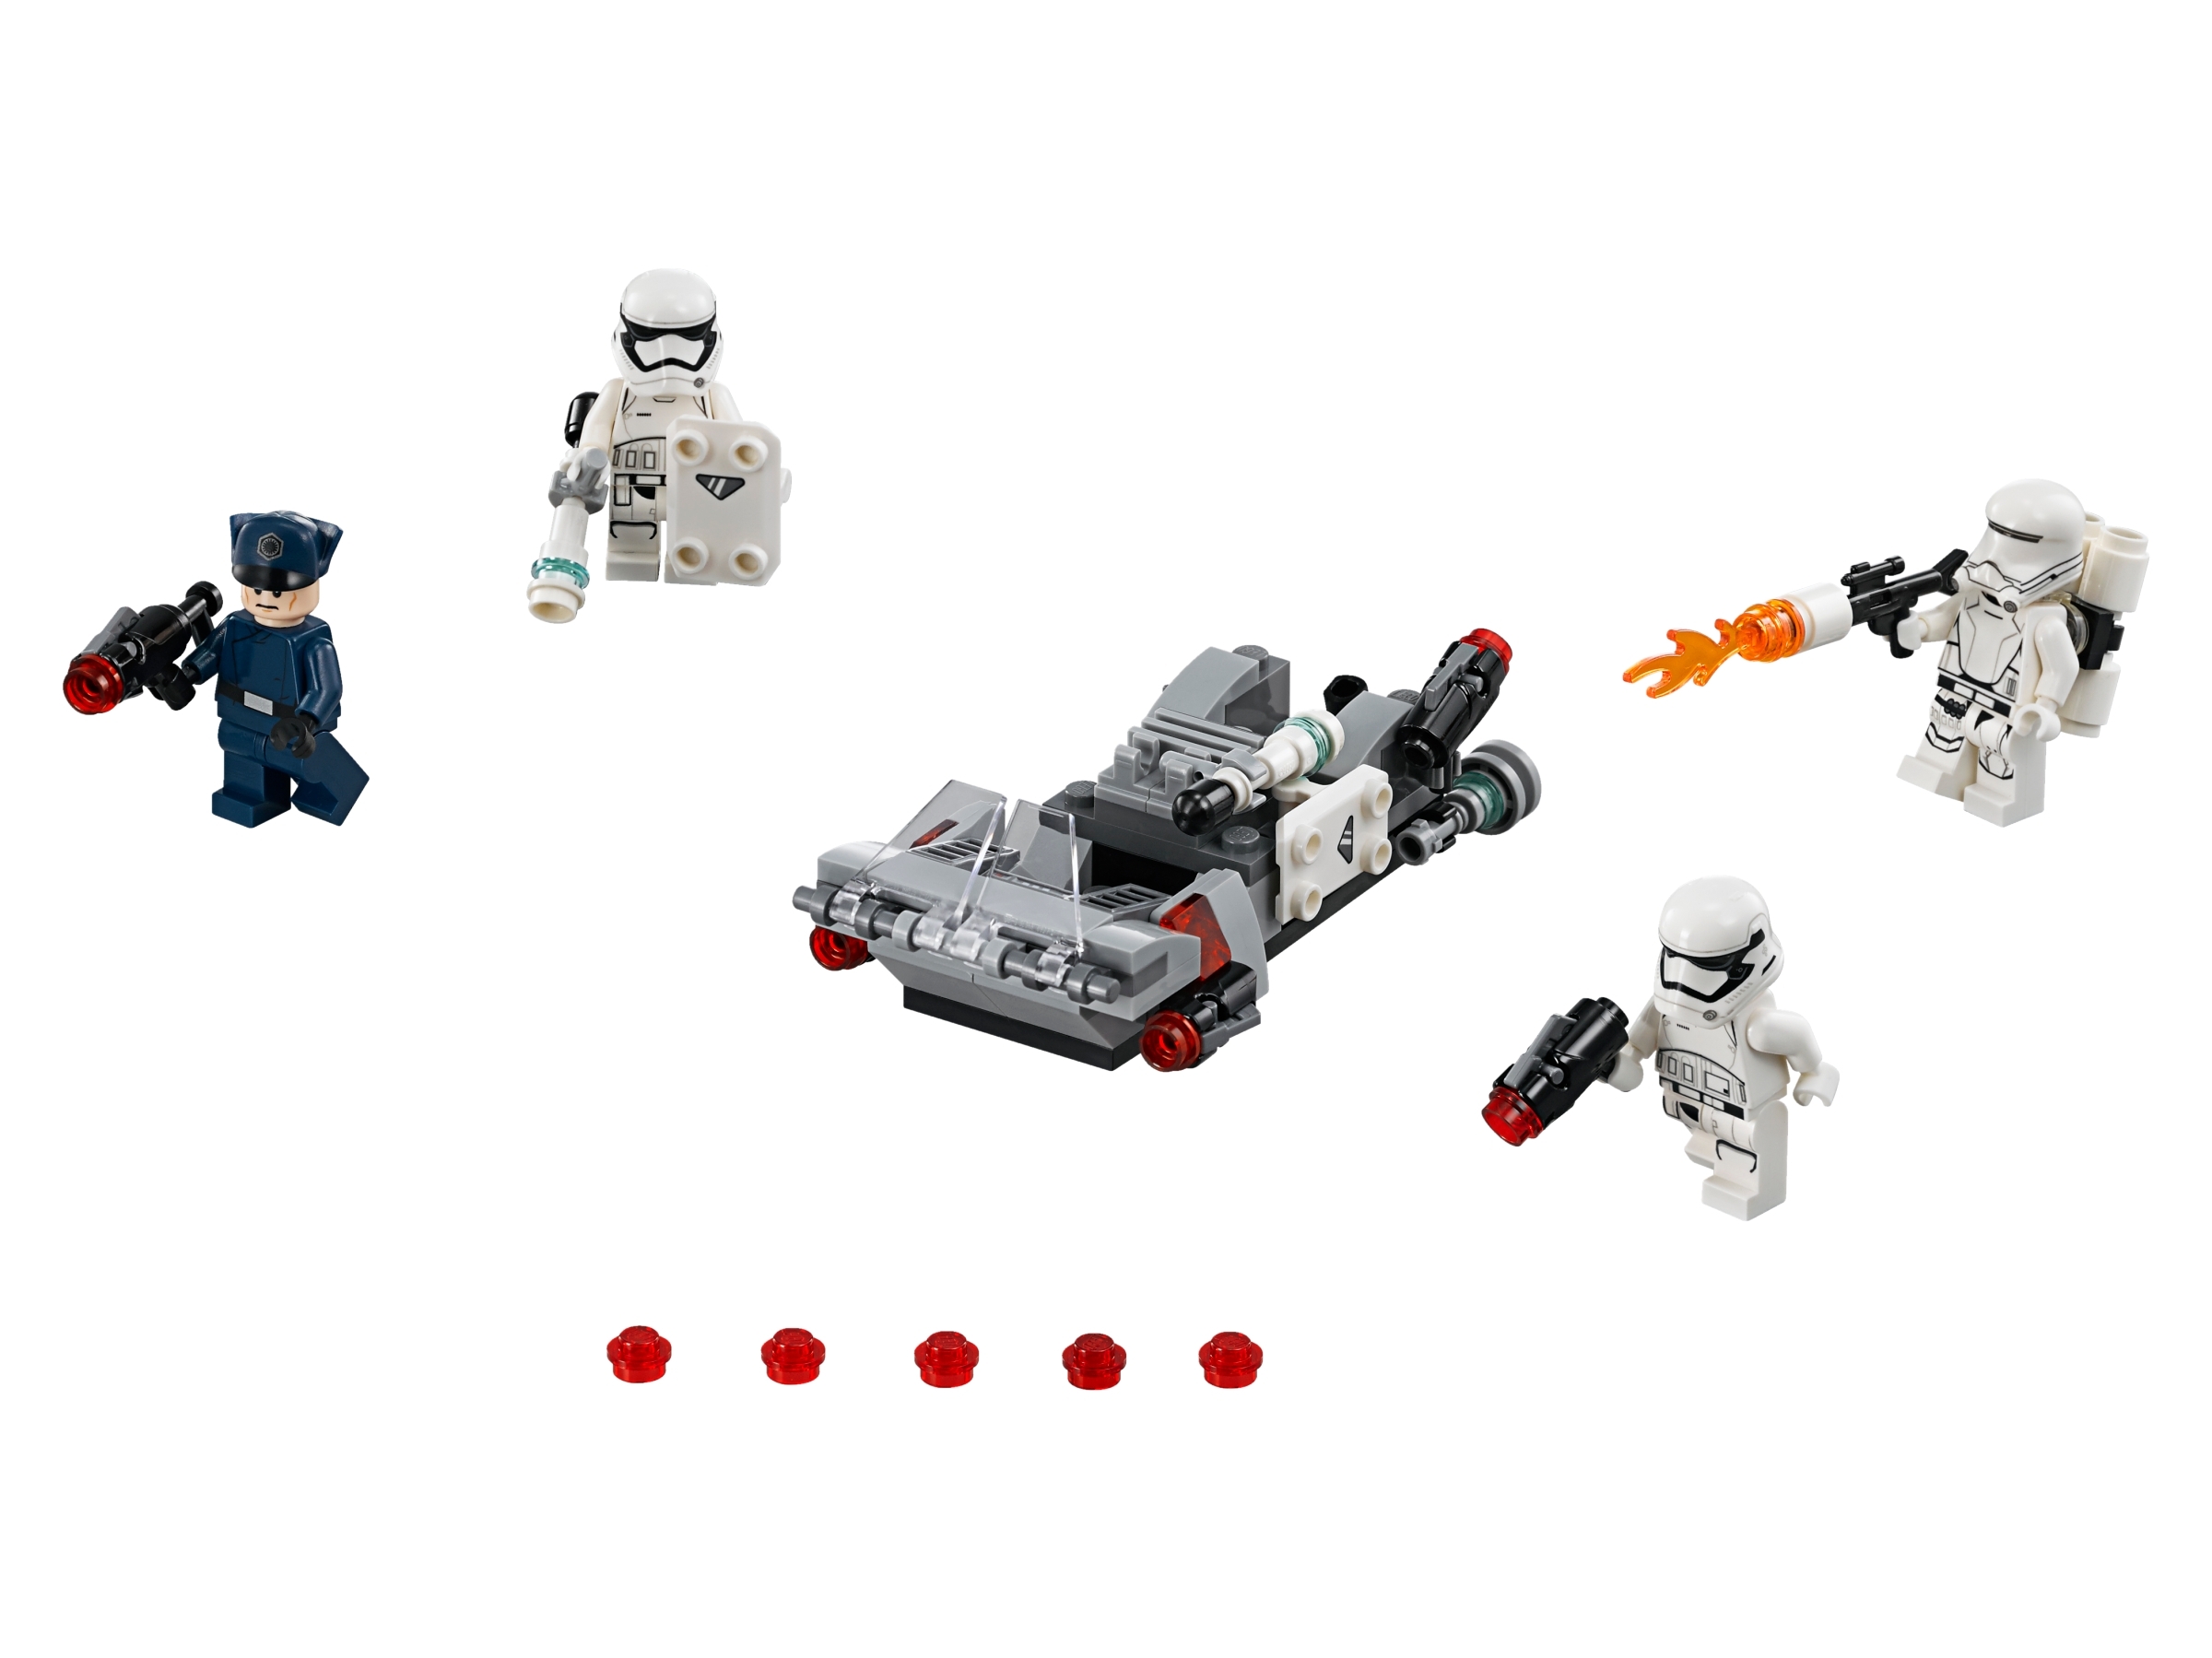 LEGO® Star Wars First Order battle Pack 75132 NEW Retired Stormtroopers